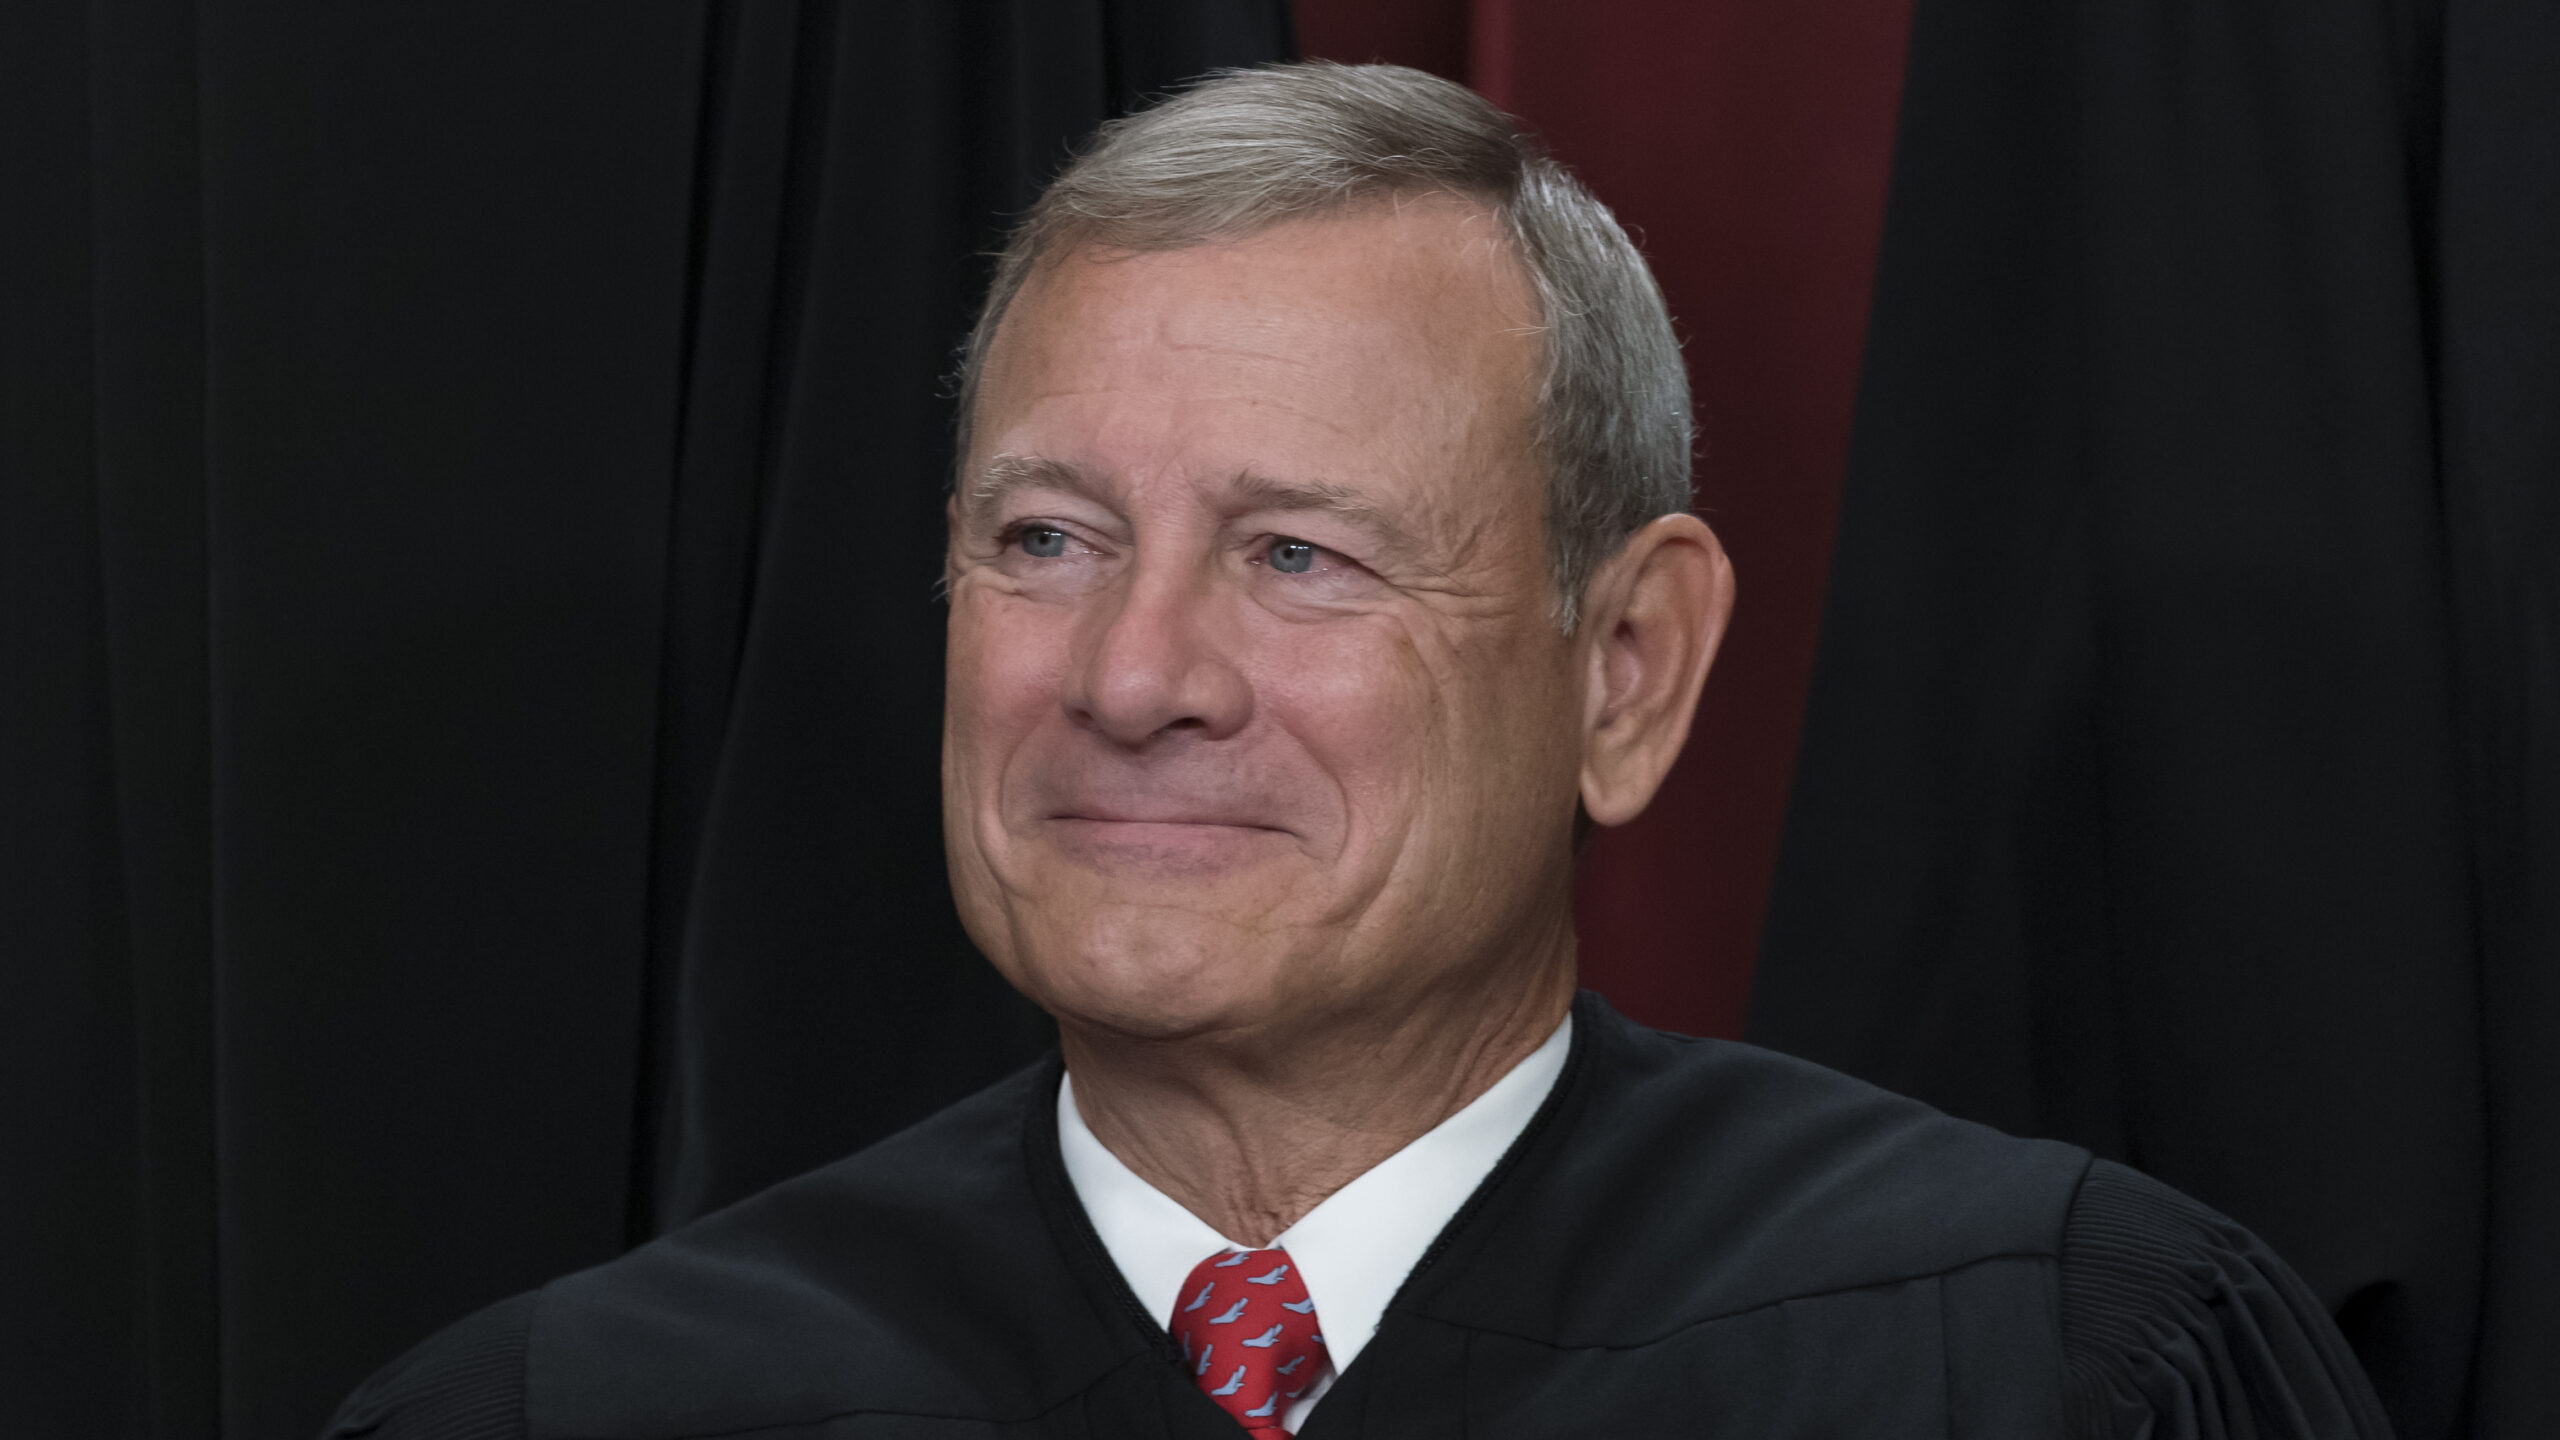 Chief Justice Roberts casts a wary eye on artificial intelligence in the courts